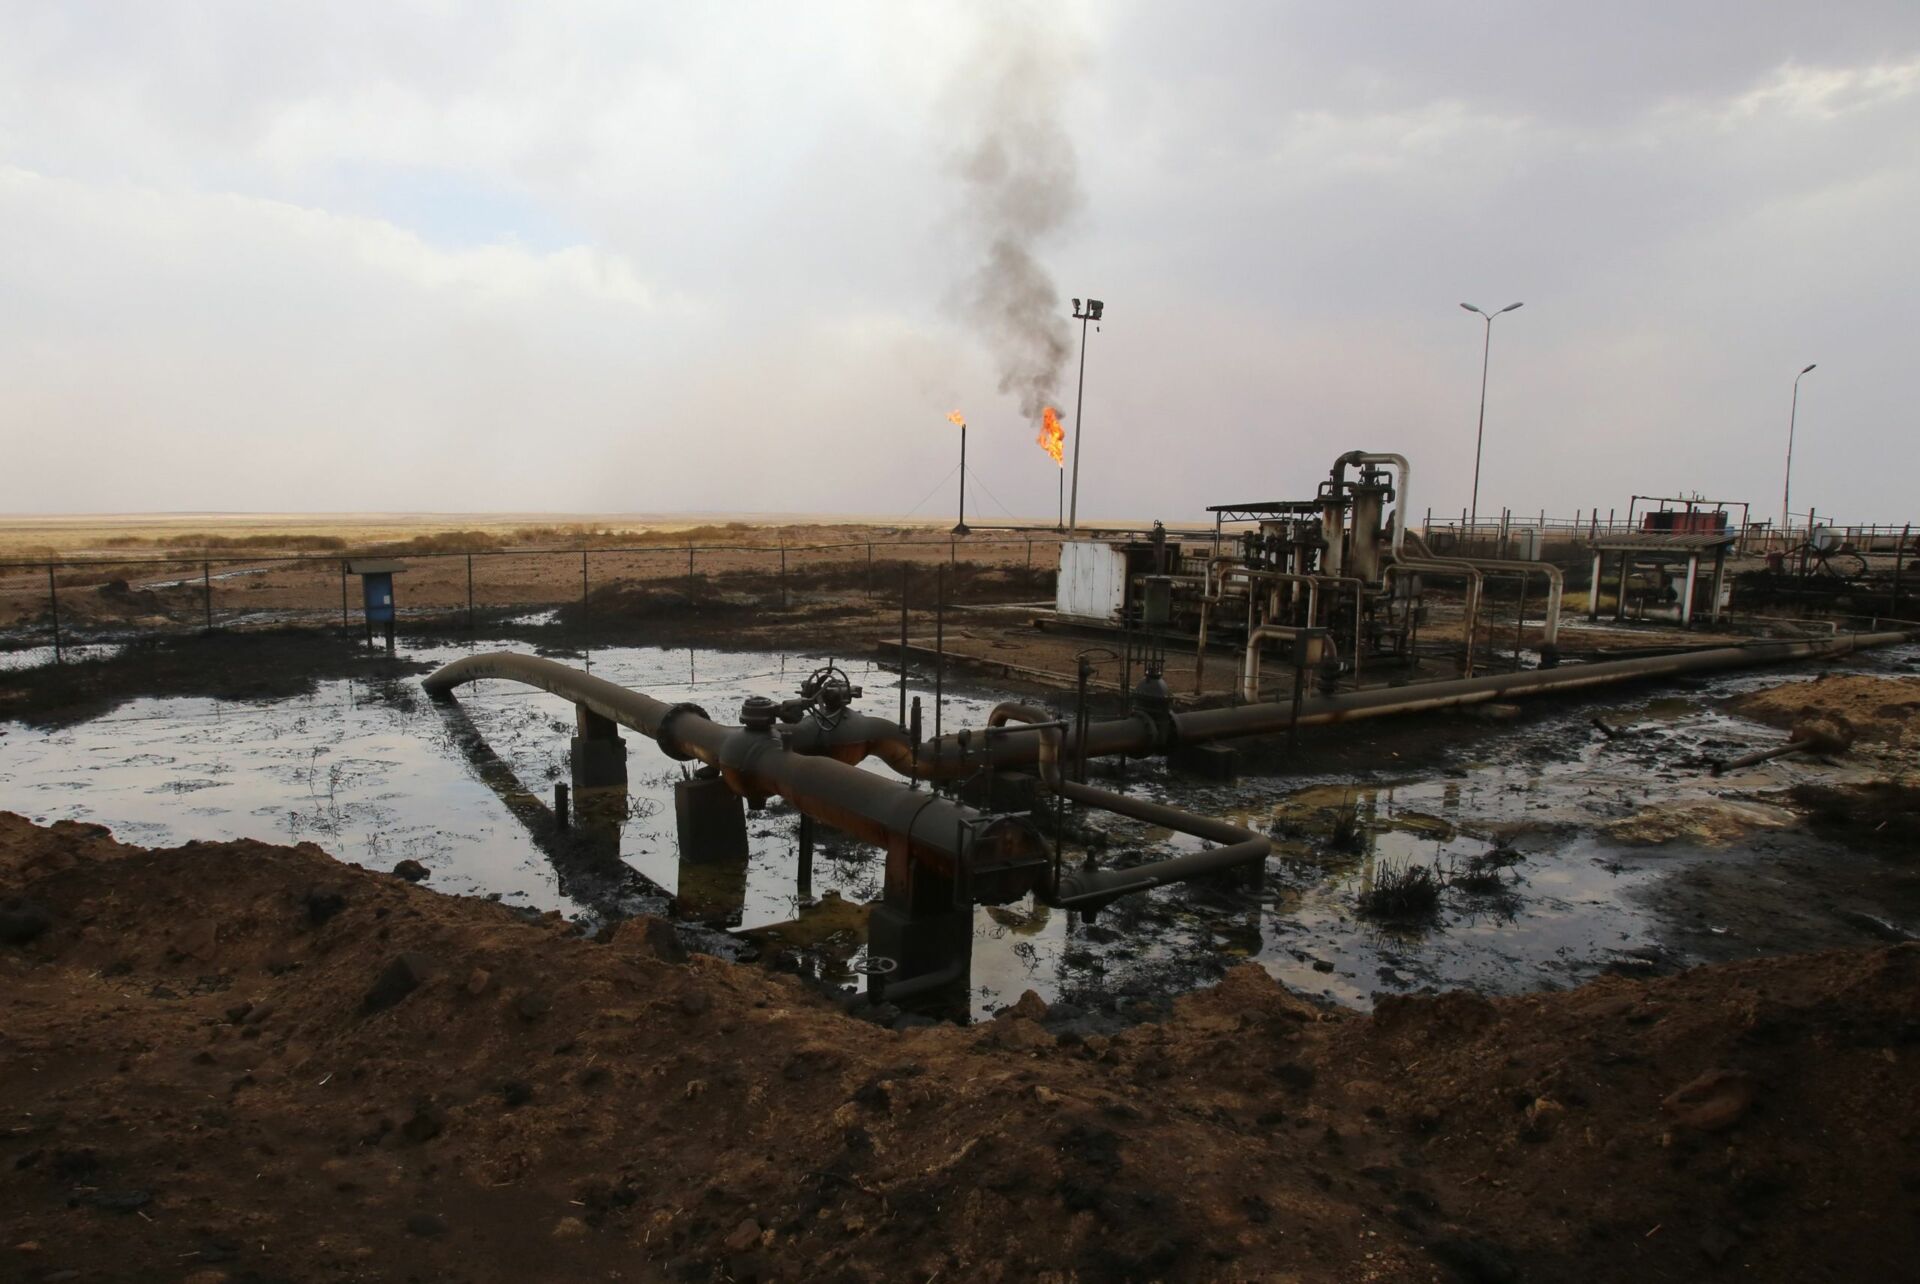 Oil well pumps are seen in the Rmeilane oil field in Syria's northerneastern Hasakeh province on July 15, 2015